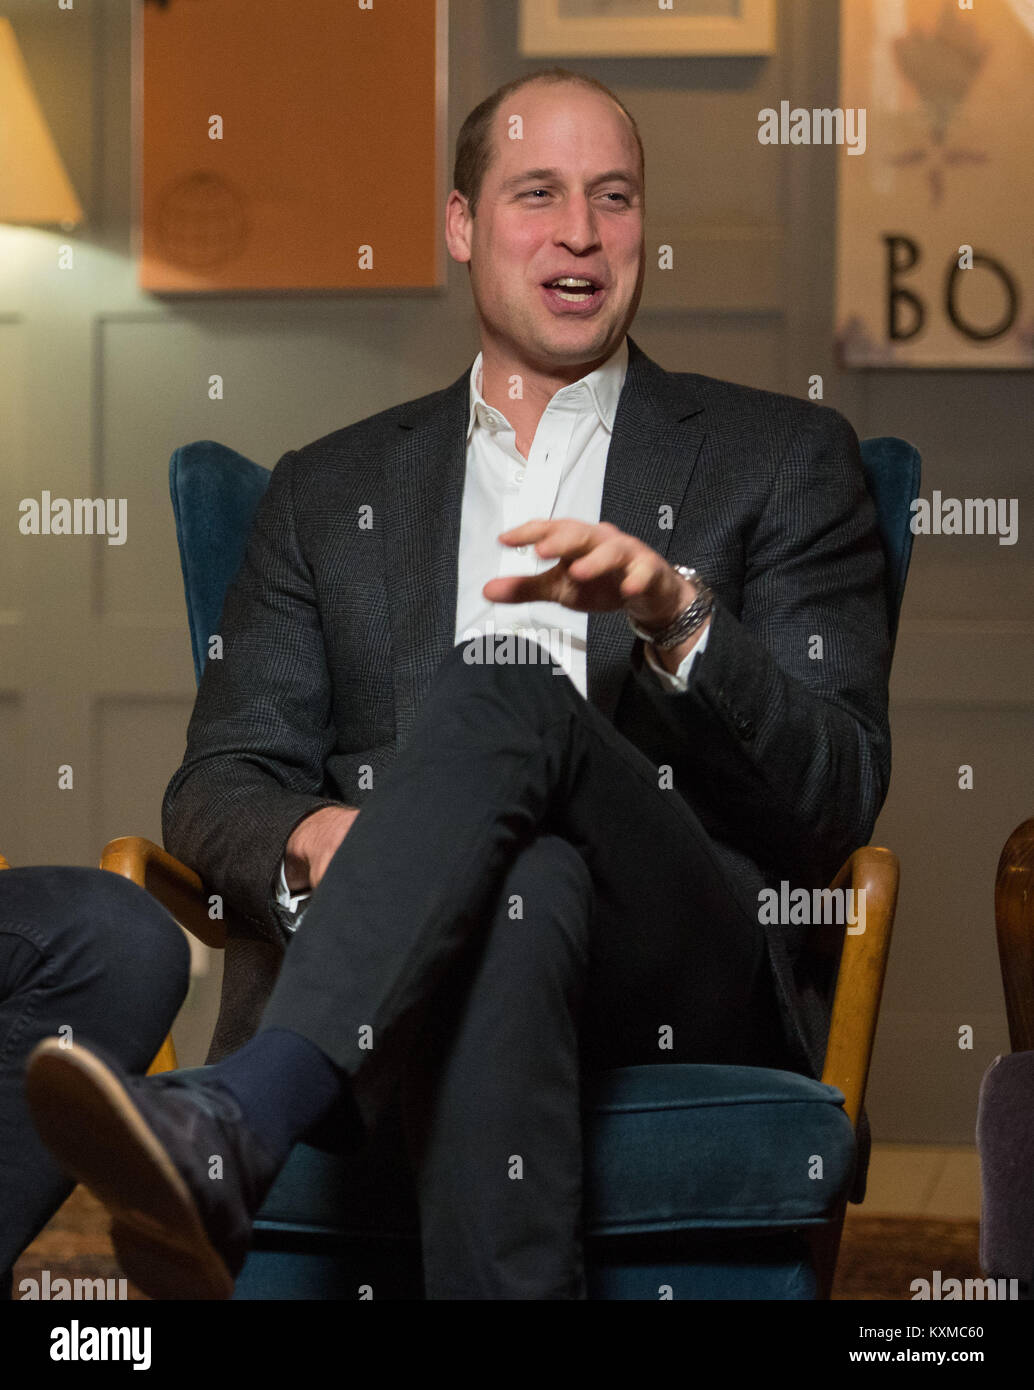 The Duke of Cambridge during a visit to meet staff, volunteers, and supporters of 'Campaign Against Living Miserably' (CALM), a charity dedicated to preventing male suicide, to lend his support to their 'Best Man Project' at High Road House, London. Stock Photo